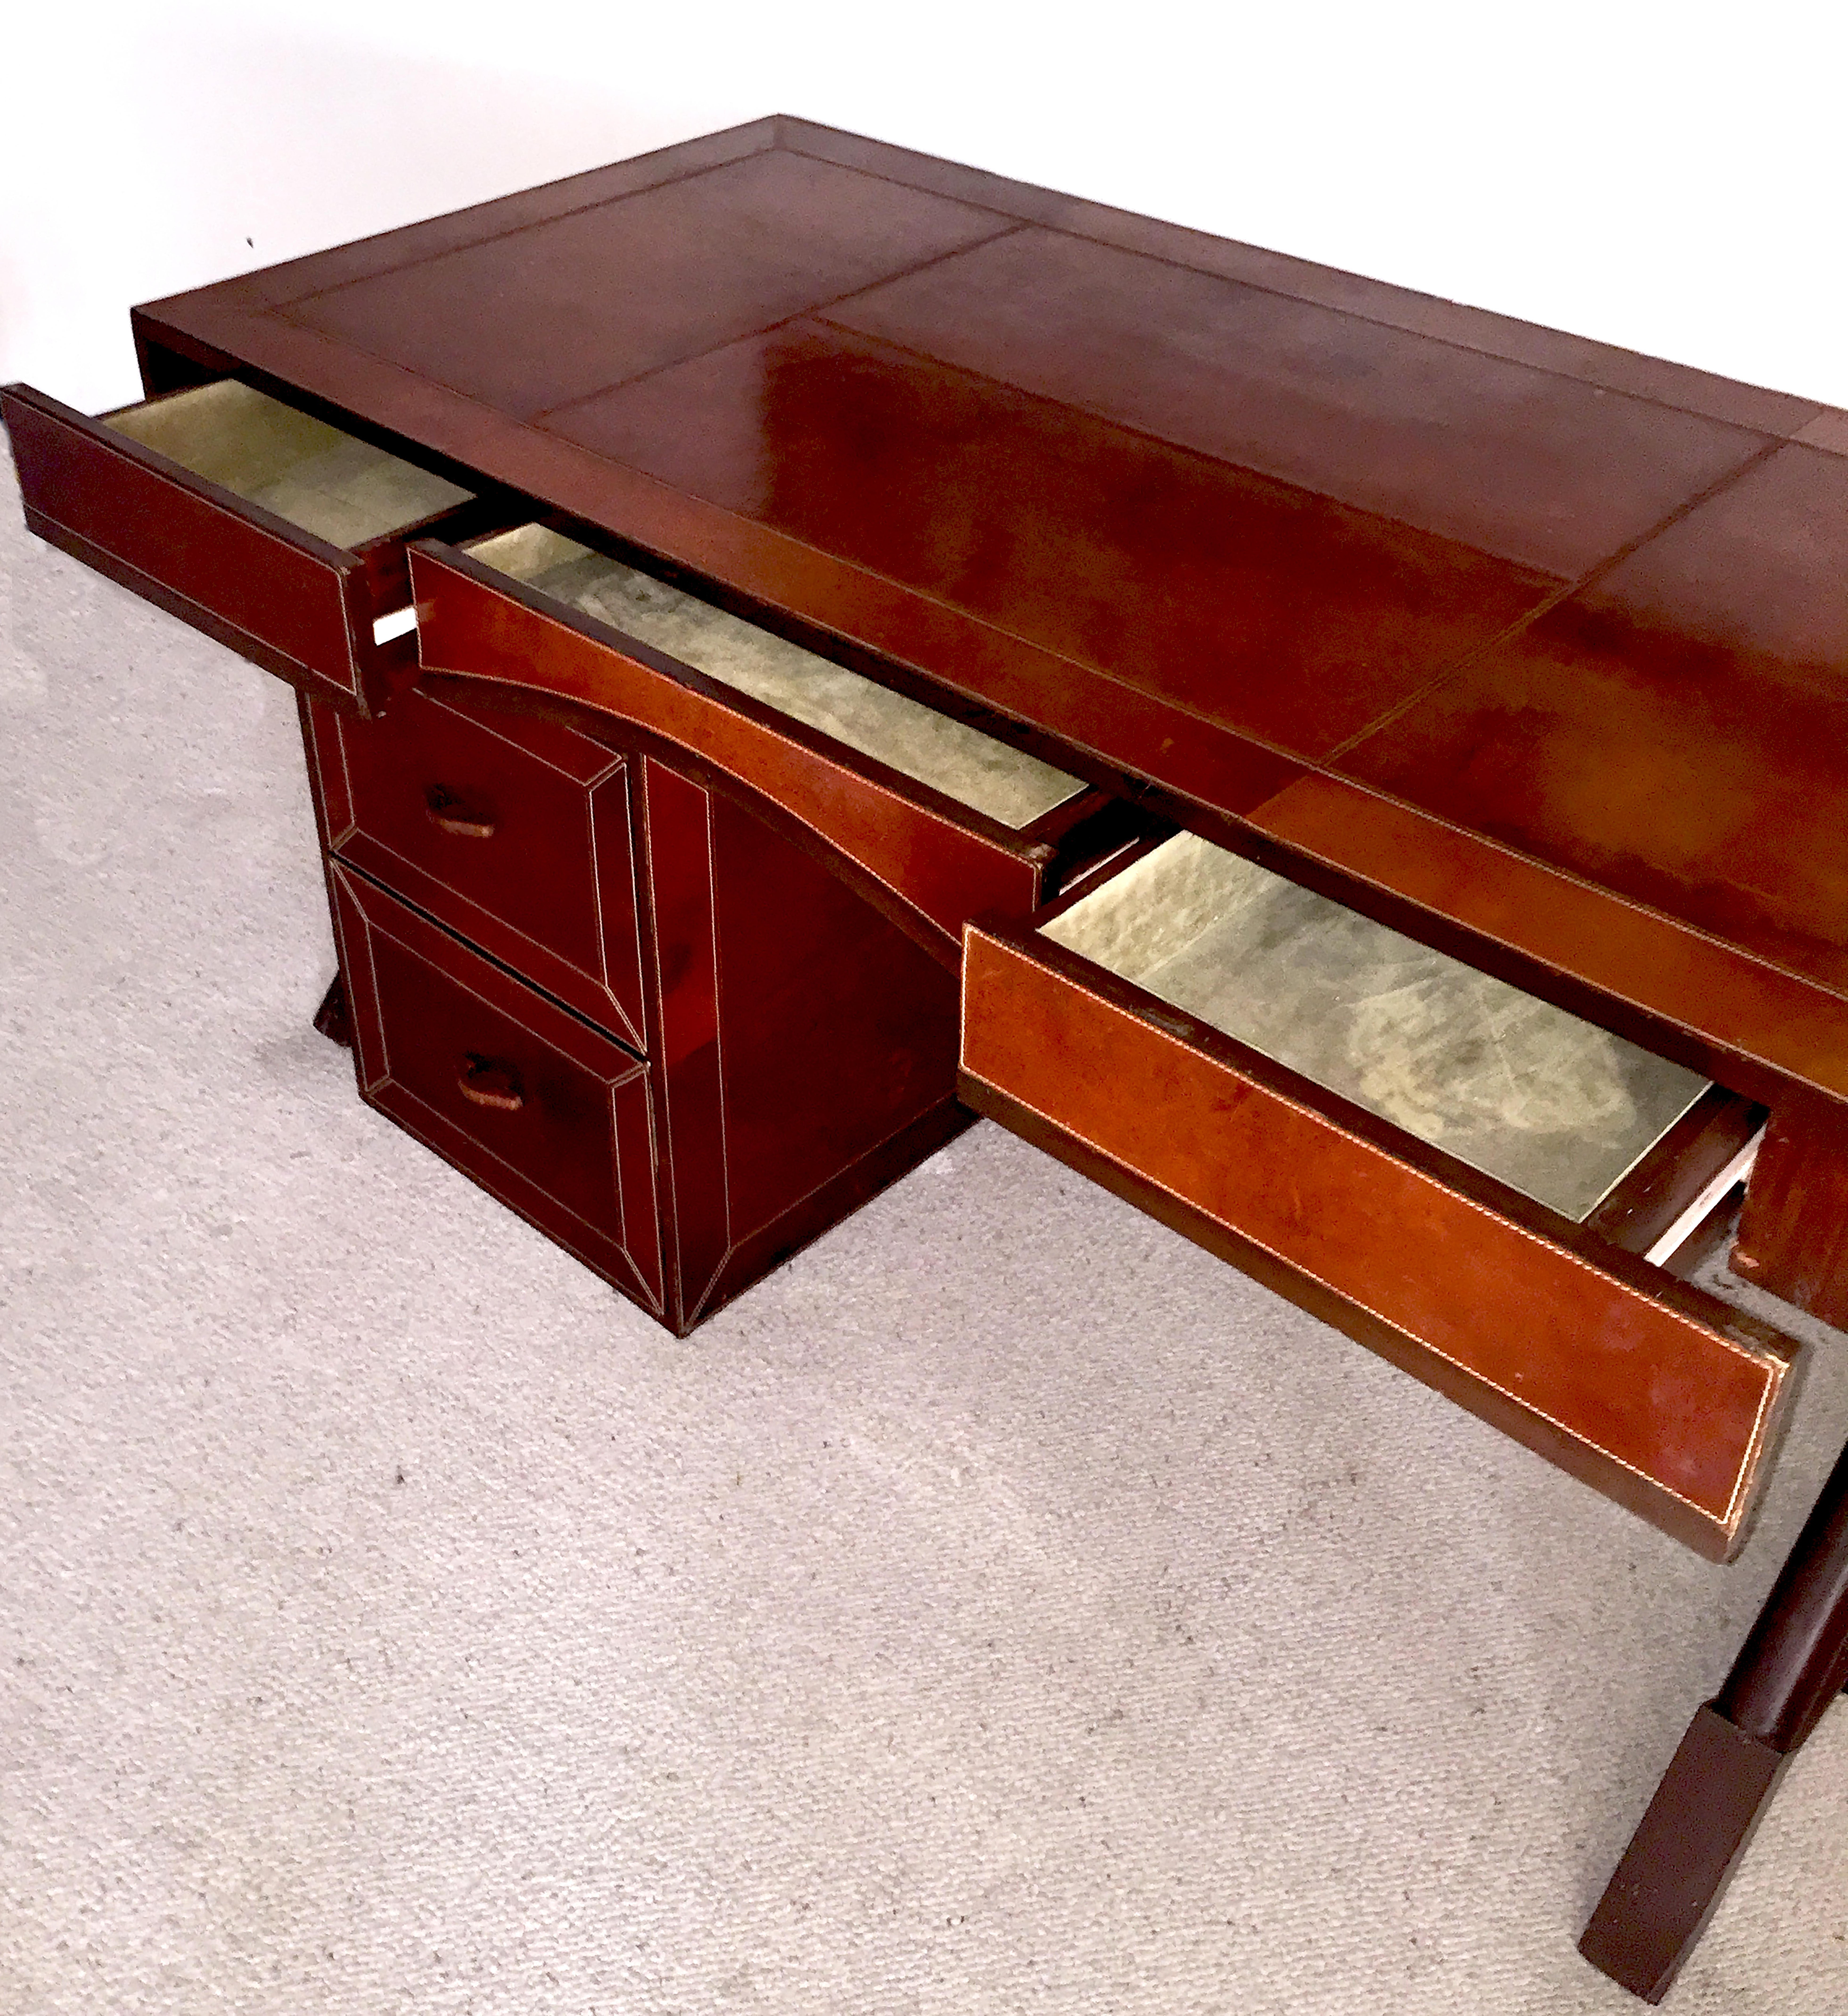 Tawny patina leather top in the style of Jacques Adnet.
Saddle stitching, the top is standing on two X-shaped legs.
Three front drawers with a curved central one.
A leather side case folders (including two deep drawers) which goes a part from the